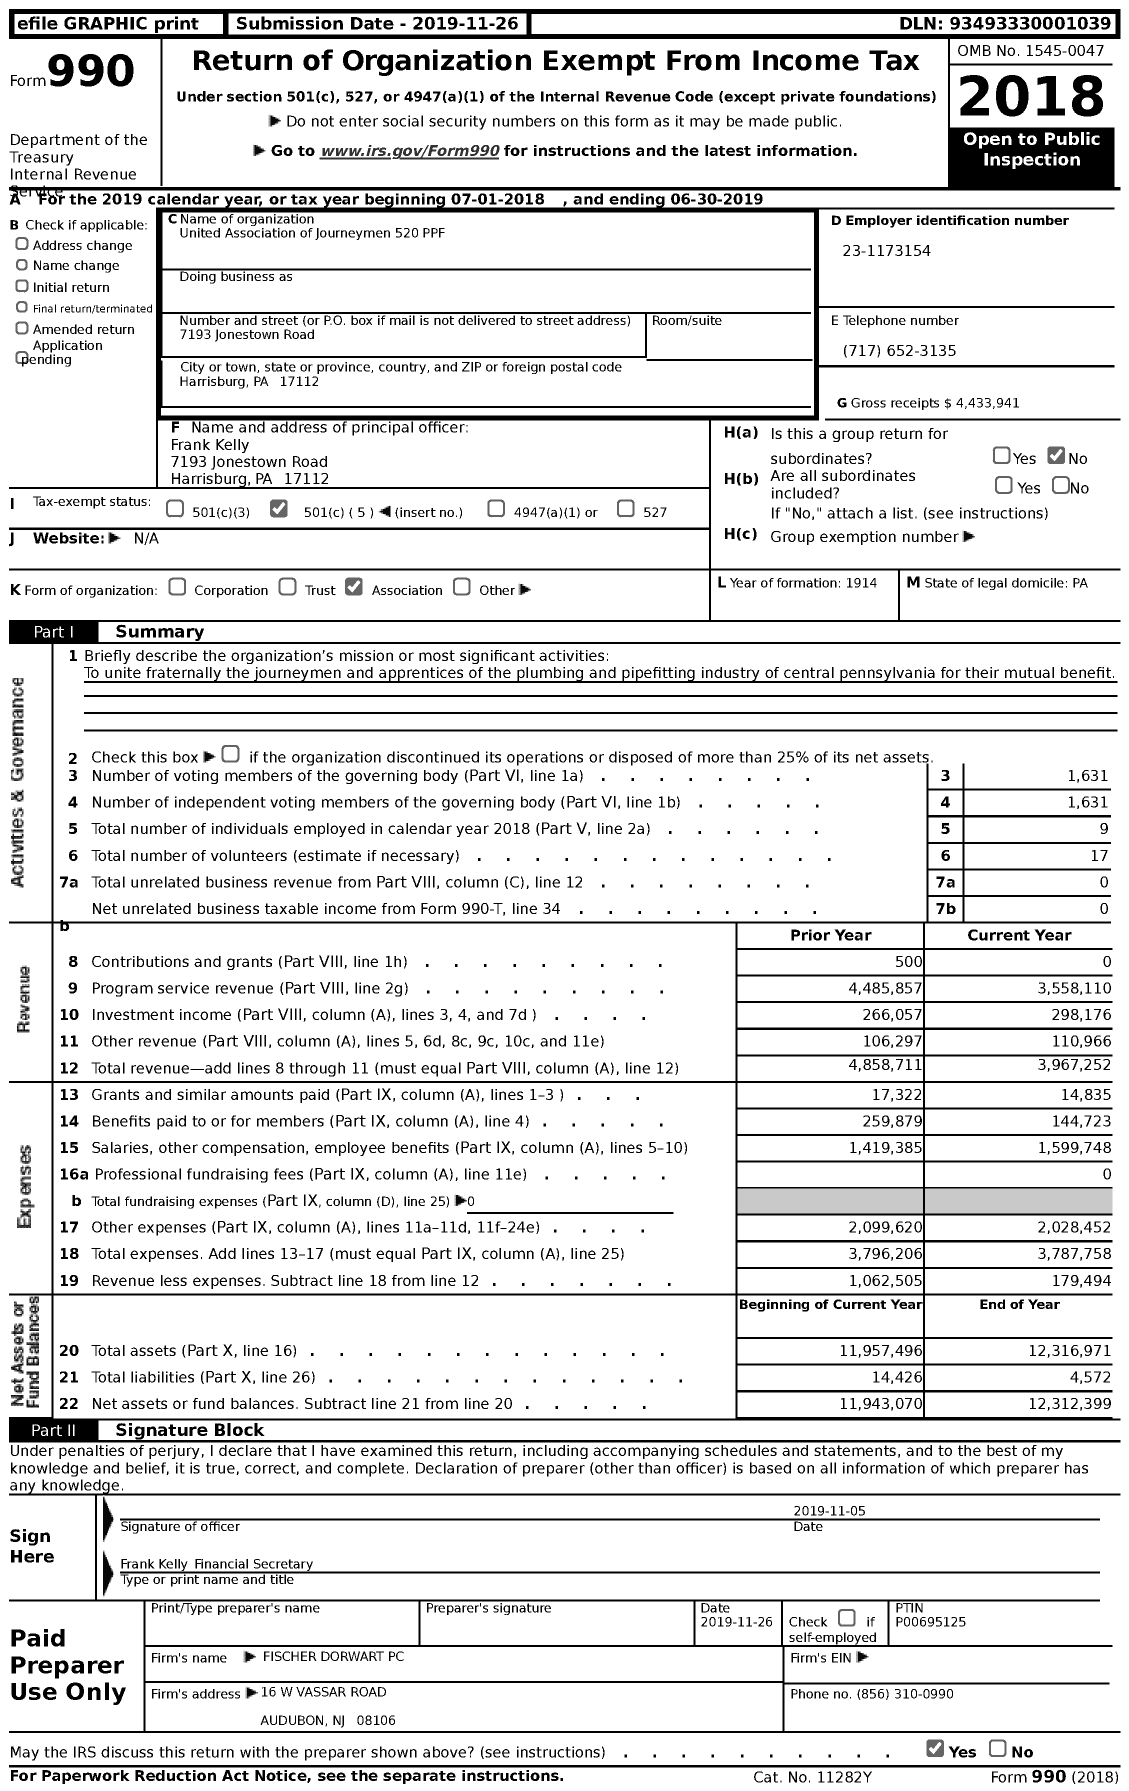 Image of first page of 2018 Form 990 for United Association - 520 PPF